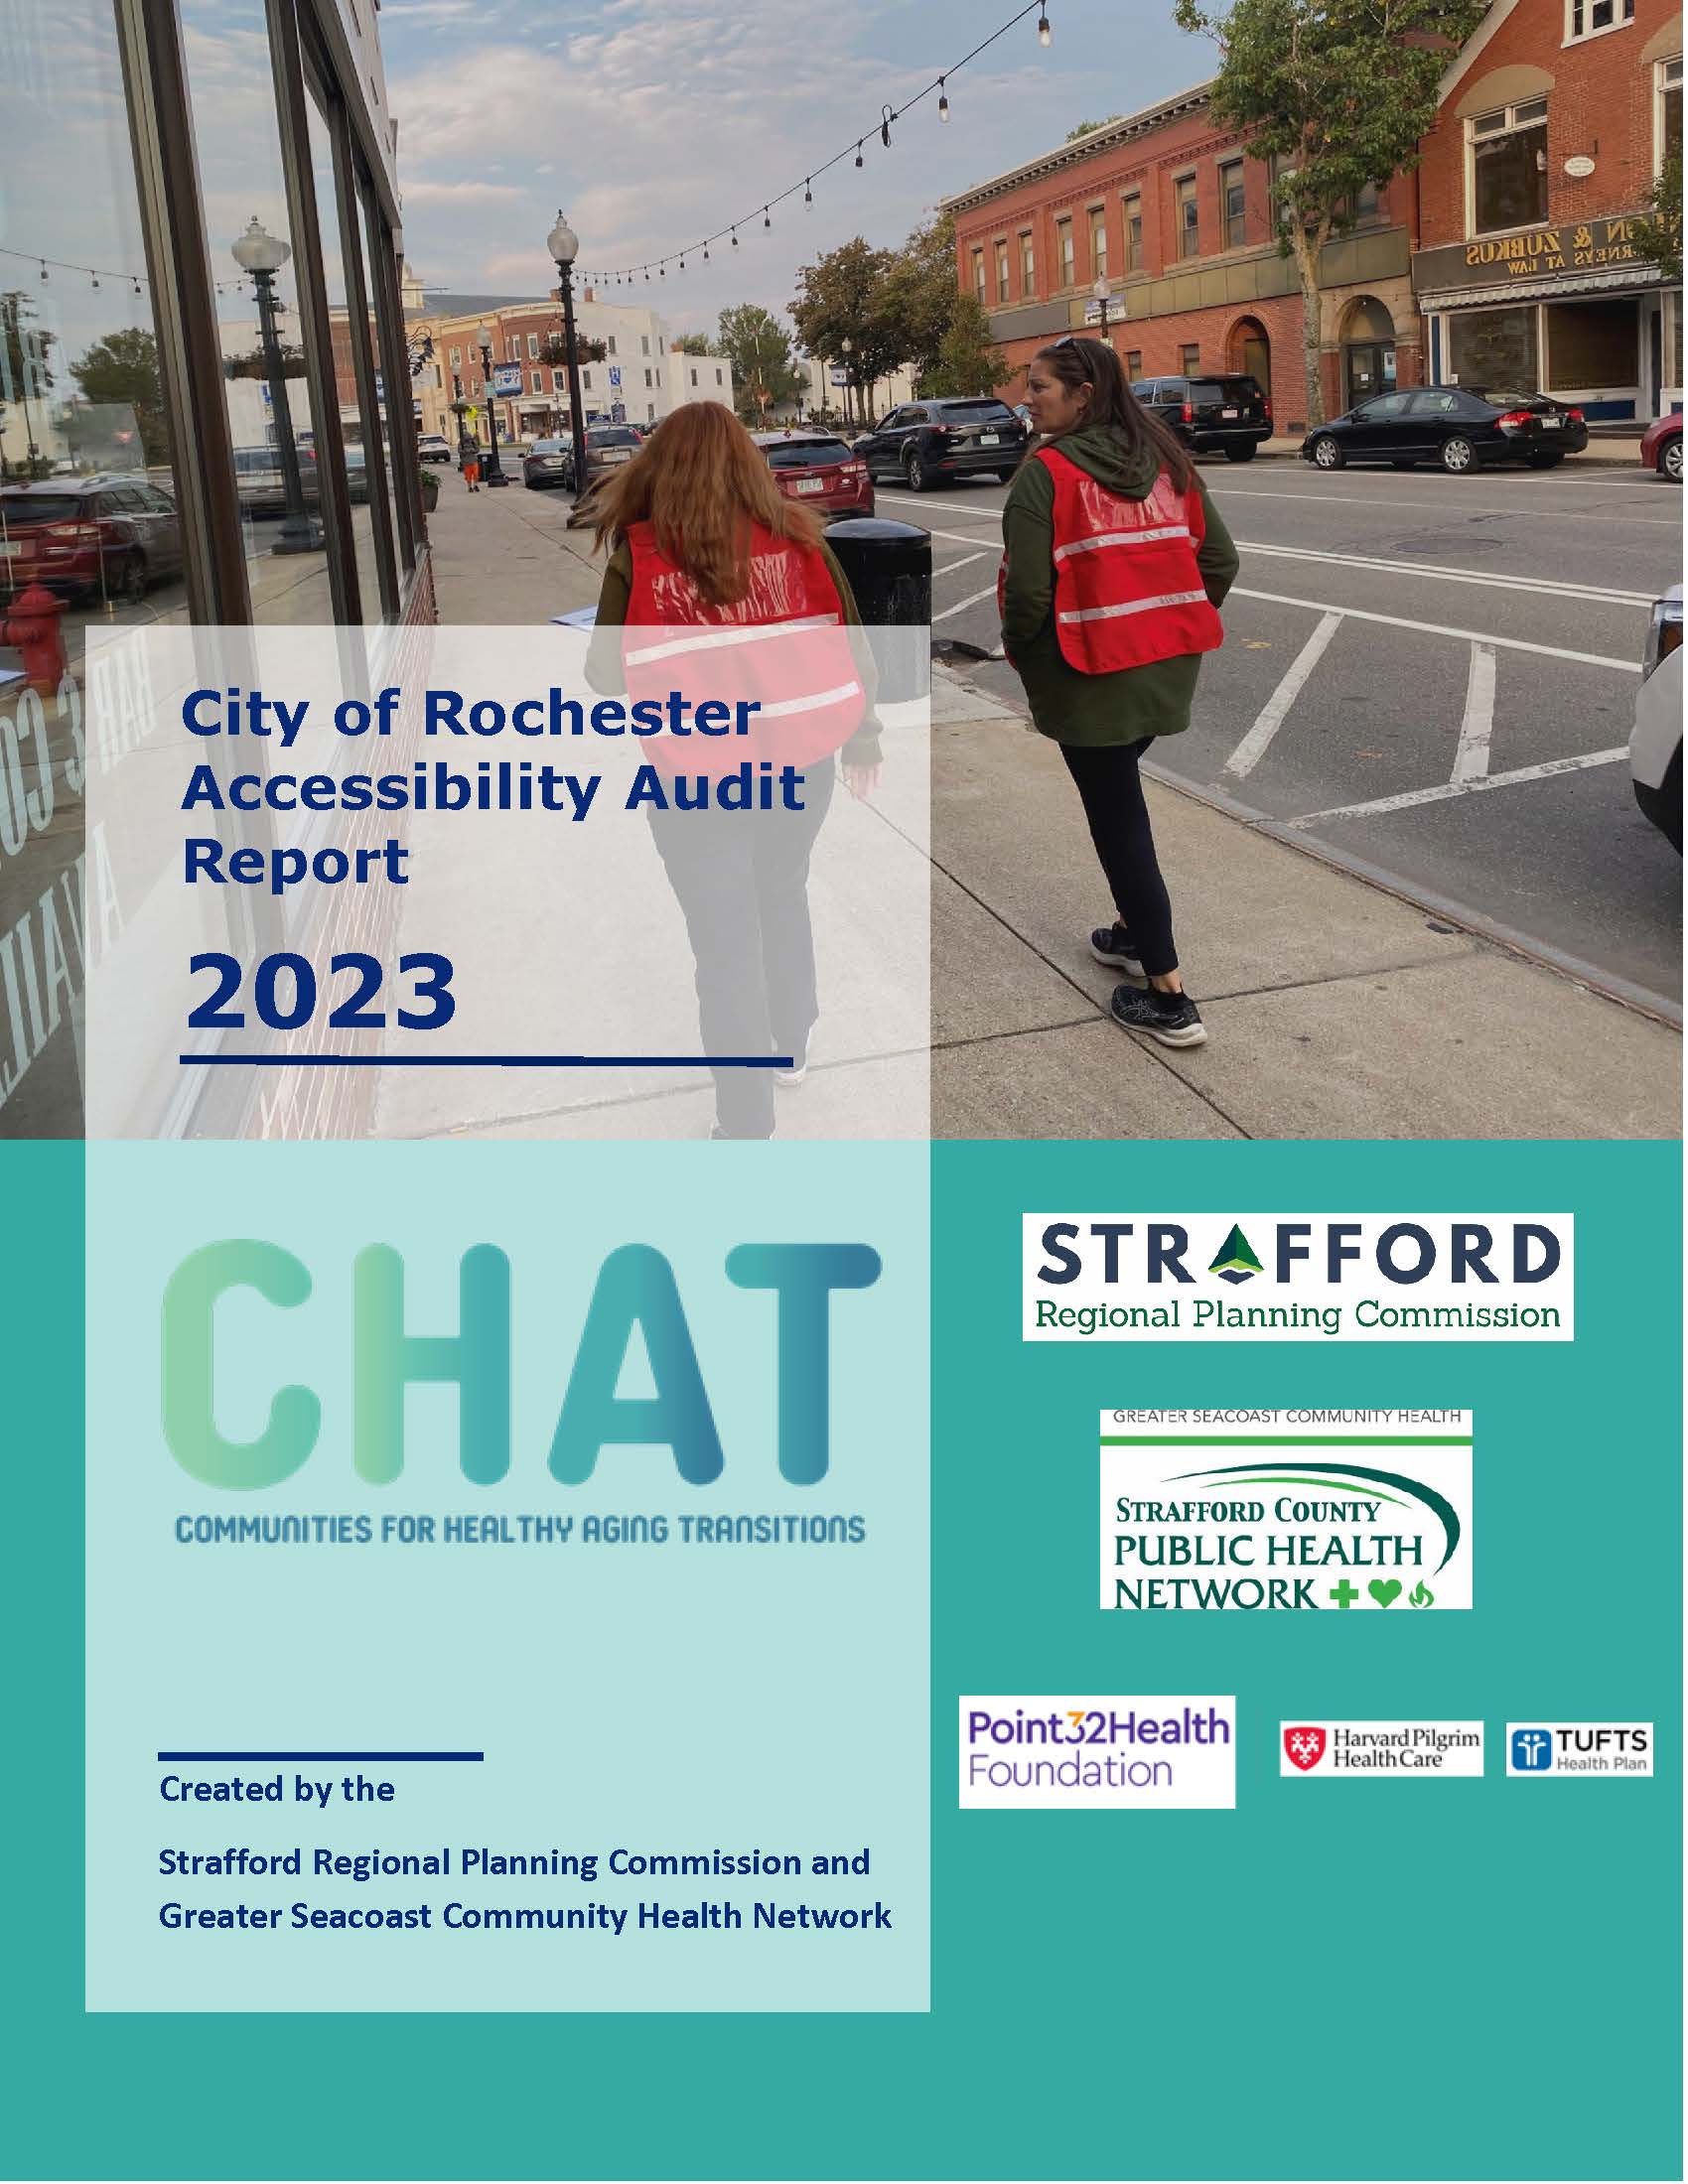 Cover of Rochester Audit with people walking and logos for the project